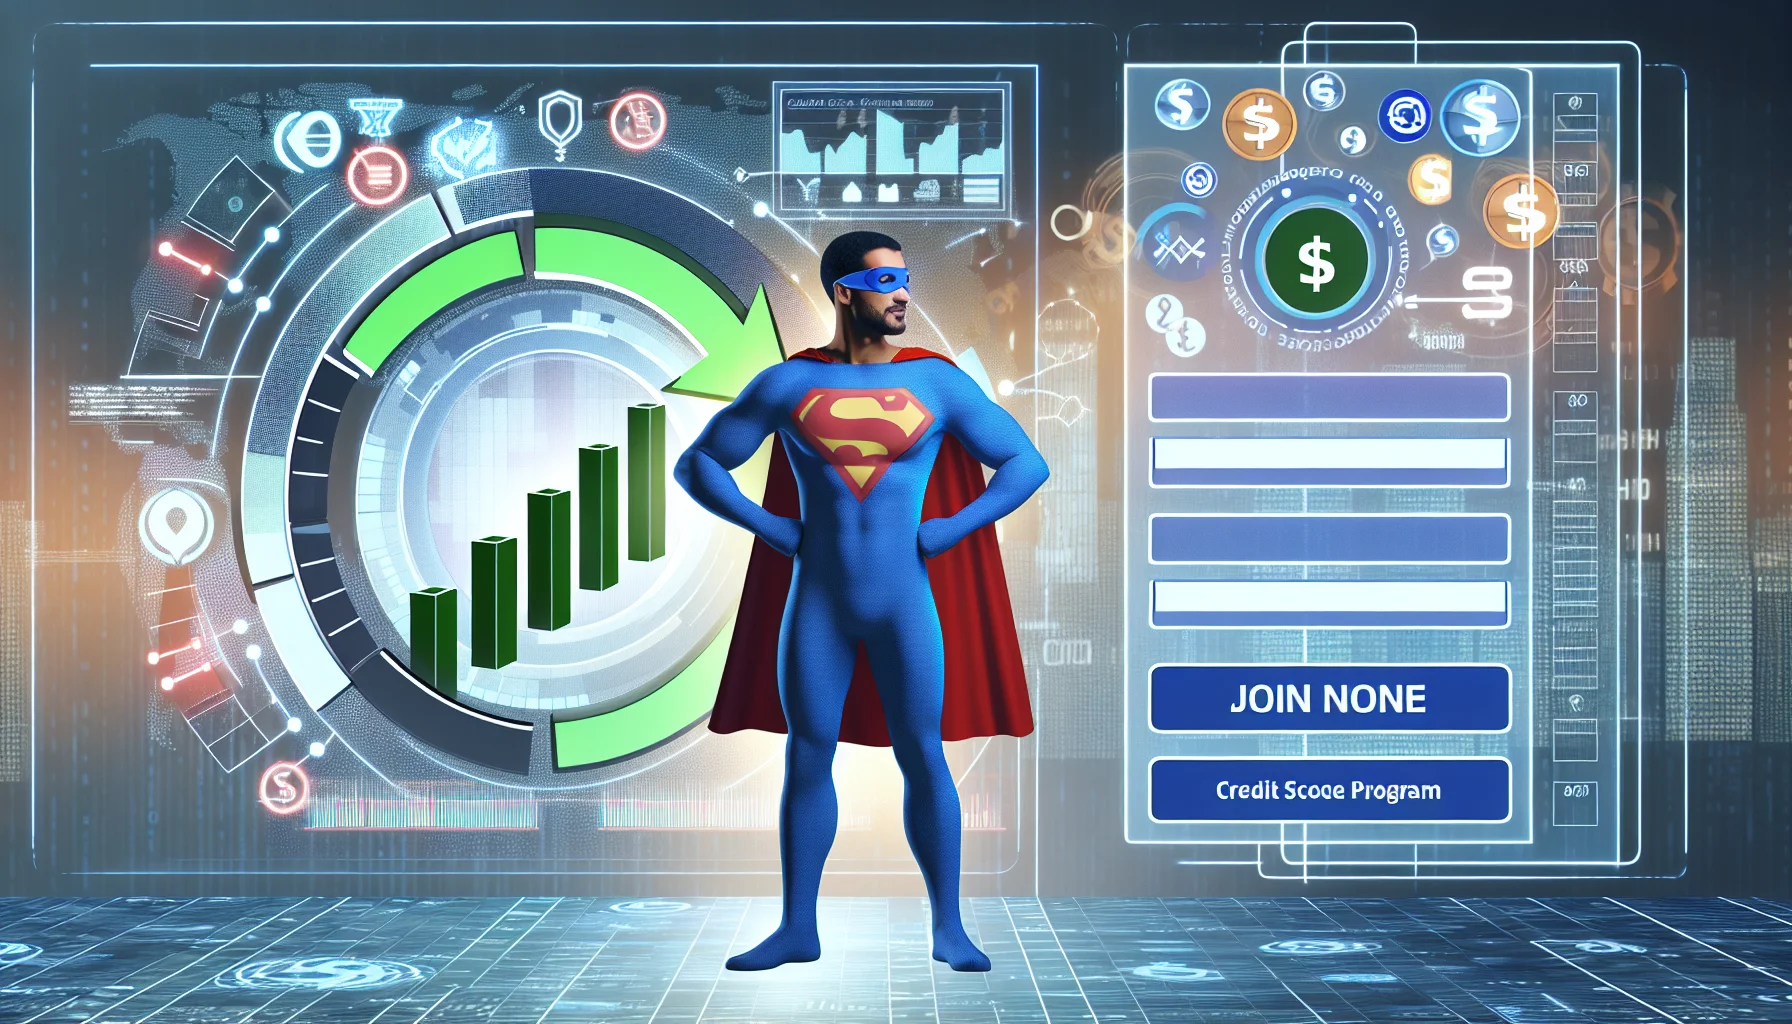 Design an amusing realistic depiction showcasing the concept of 'credit score hero'. Visualize this concept as a superhero figure, ethnically diverse and gender-neutral, standing boldly with a superhero-style emblem of a credit score chart on their costume. The background is a virtual world high-tech environment, symbolizing an online platform, filled with images of currencies, flowcharts, grids, and binary code to represent the concept of 'making money online'. To the side, portray an engaging and fashionable login panel, with the tagline 'join the credit score hero affiliate program'.